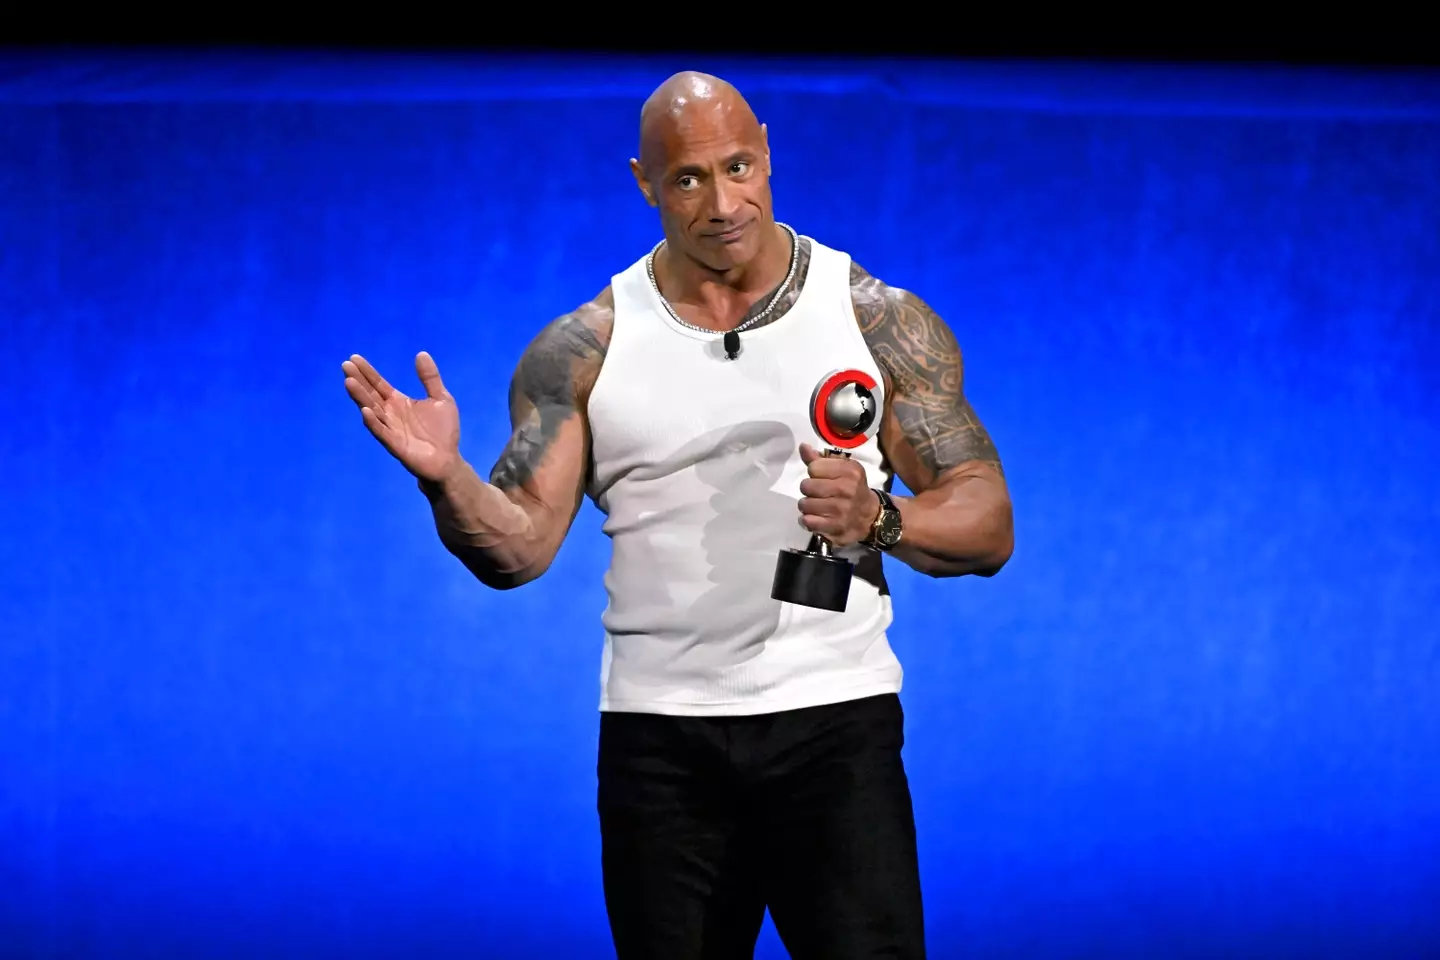 Dwayne Johnson has become one of the Hollywood's biggest stars (Getty)